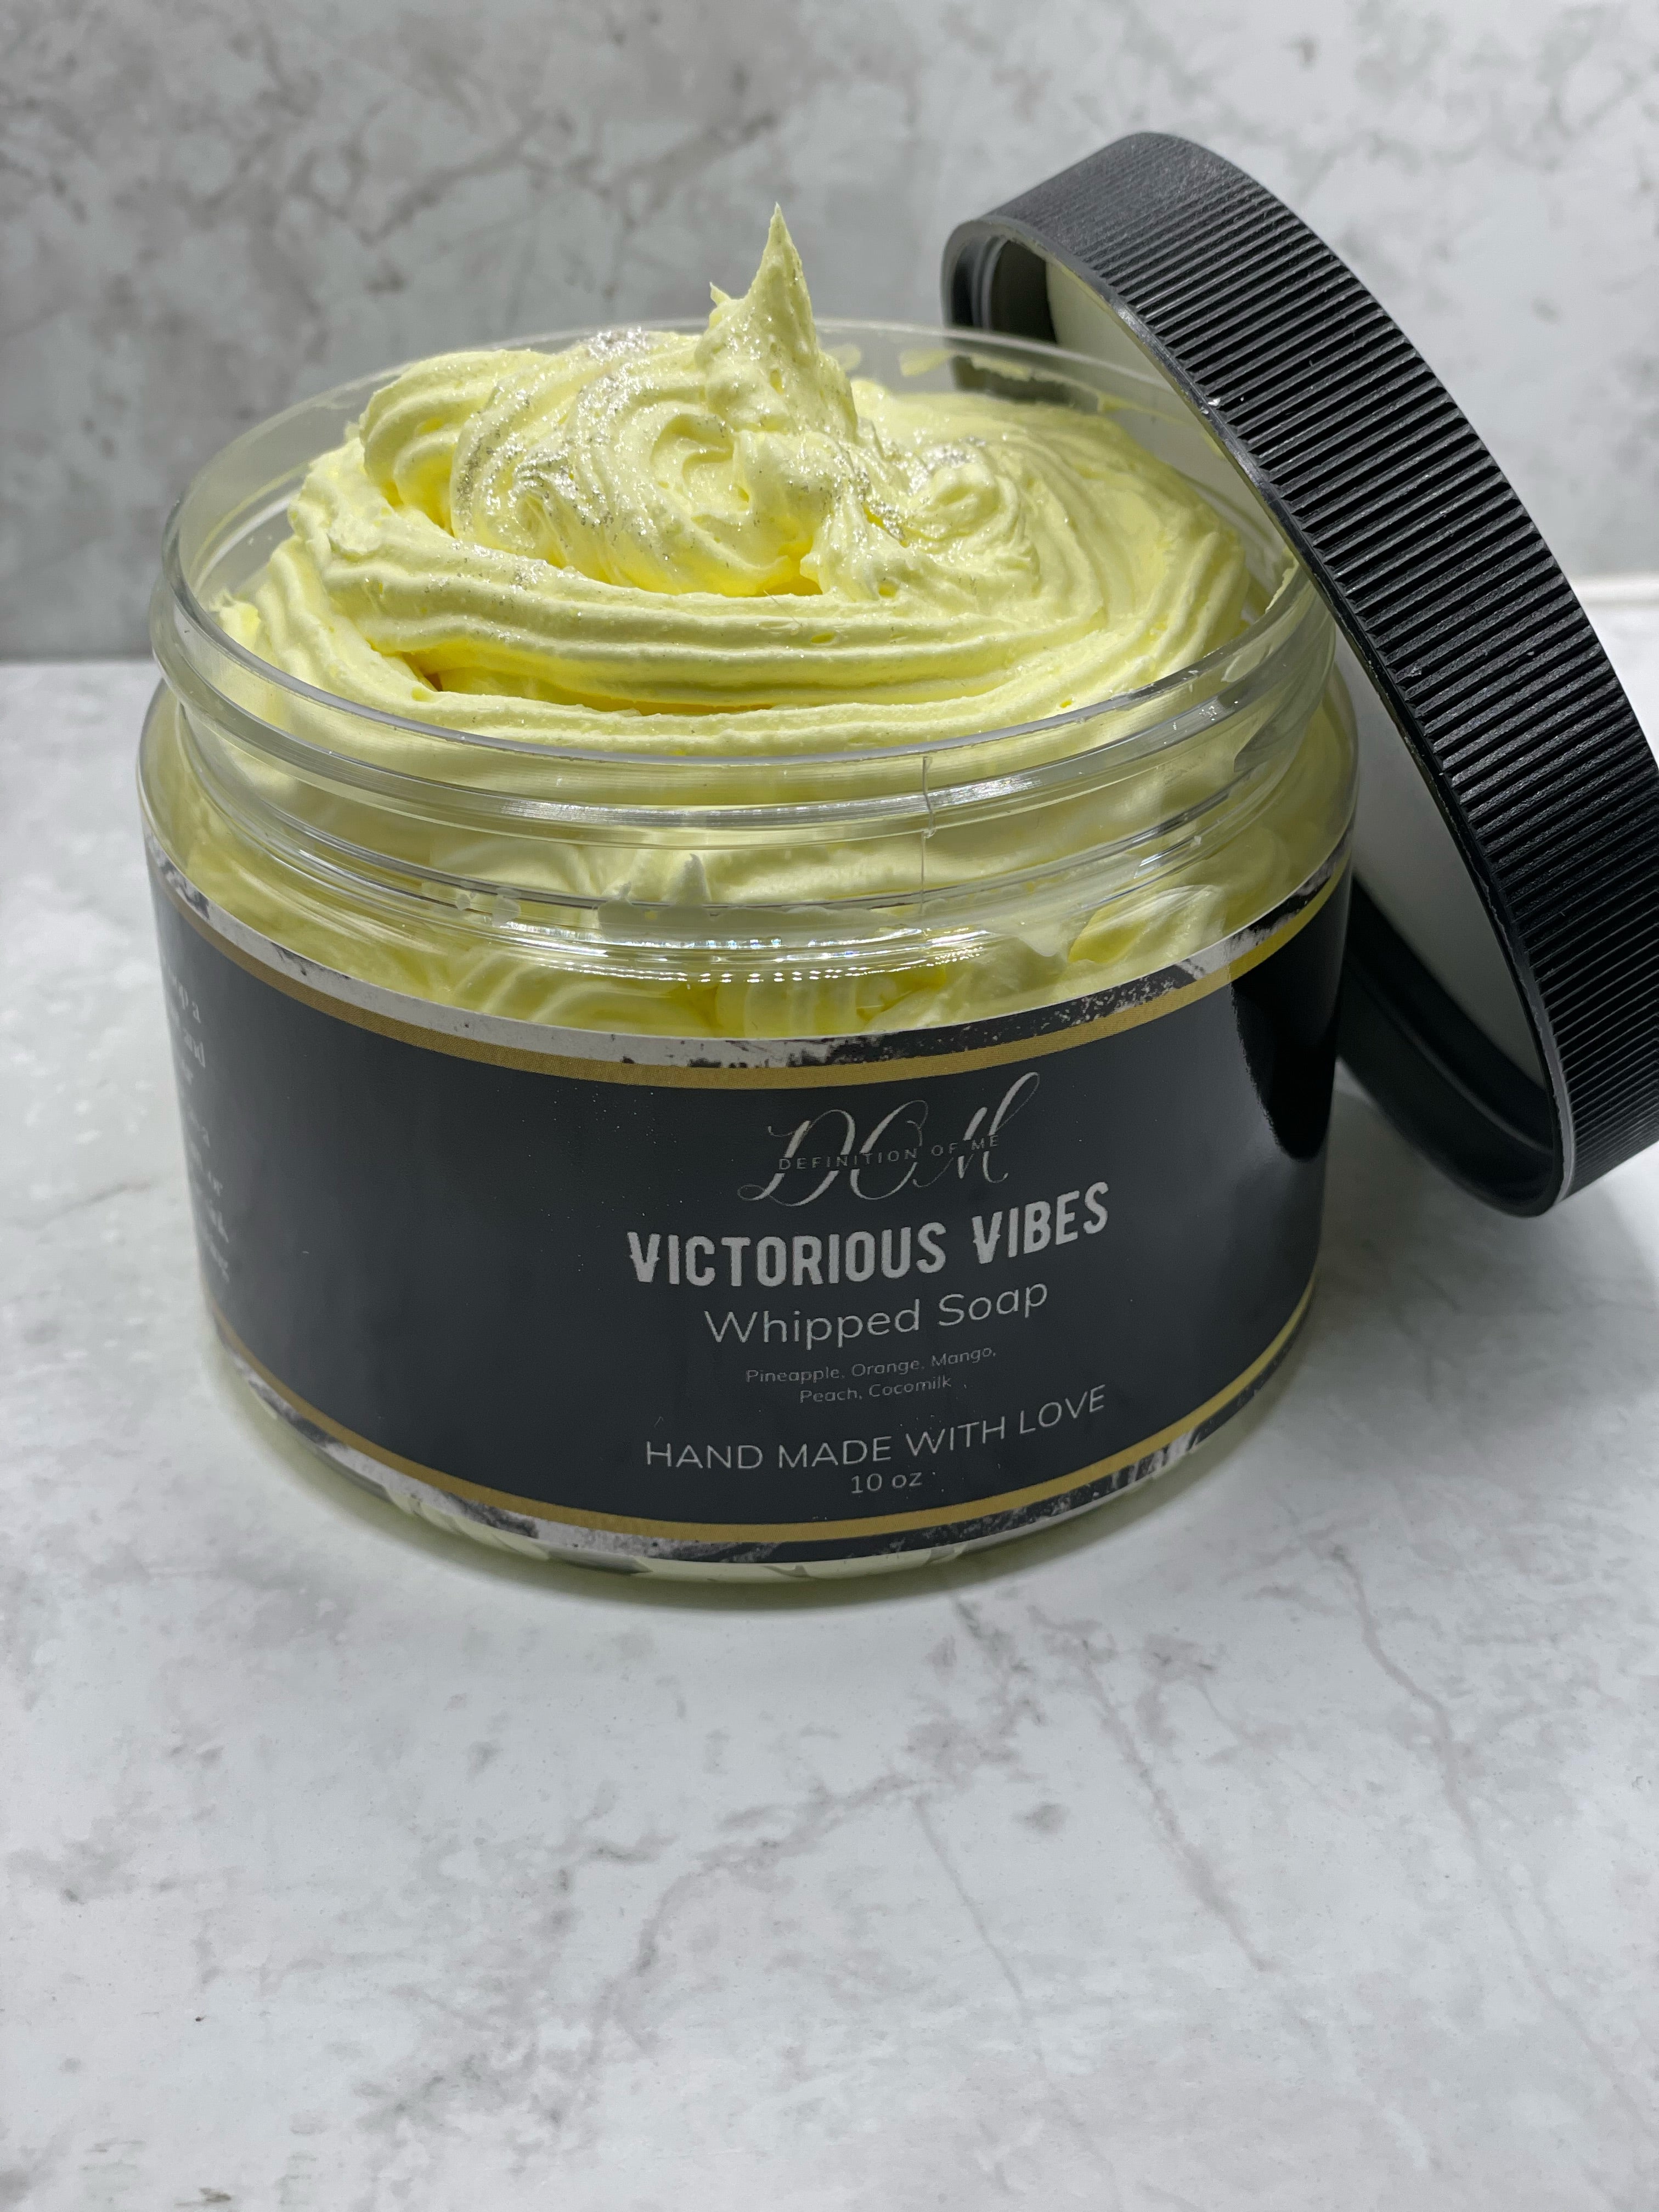 Whipped Soap: Victorious Vibes